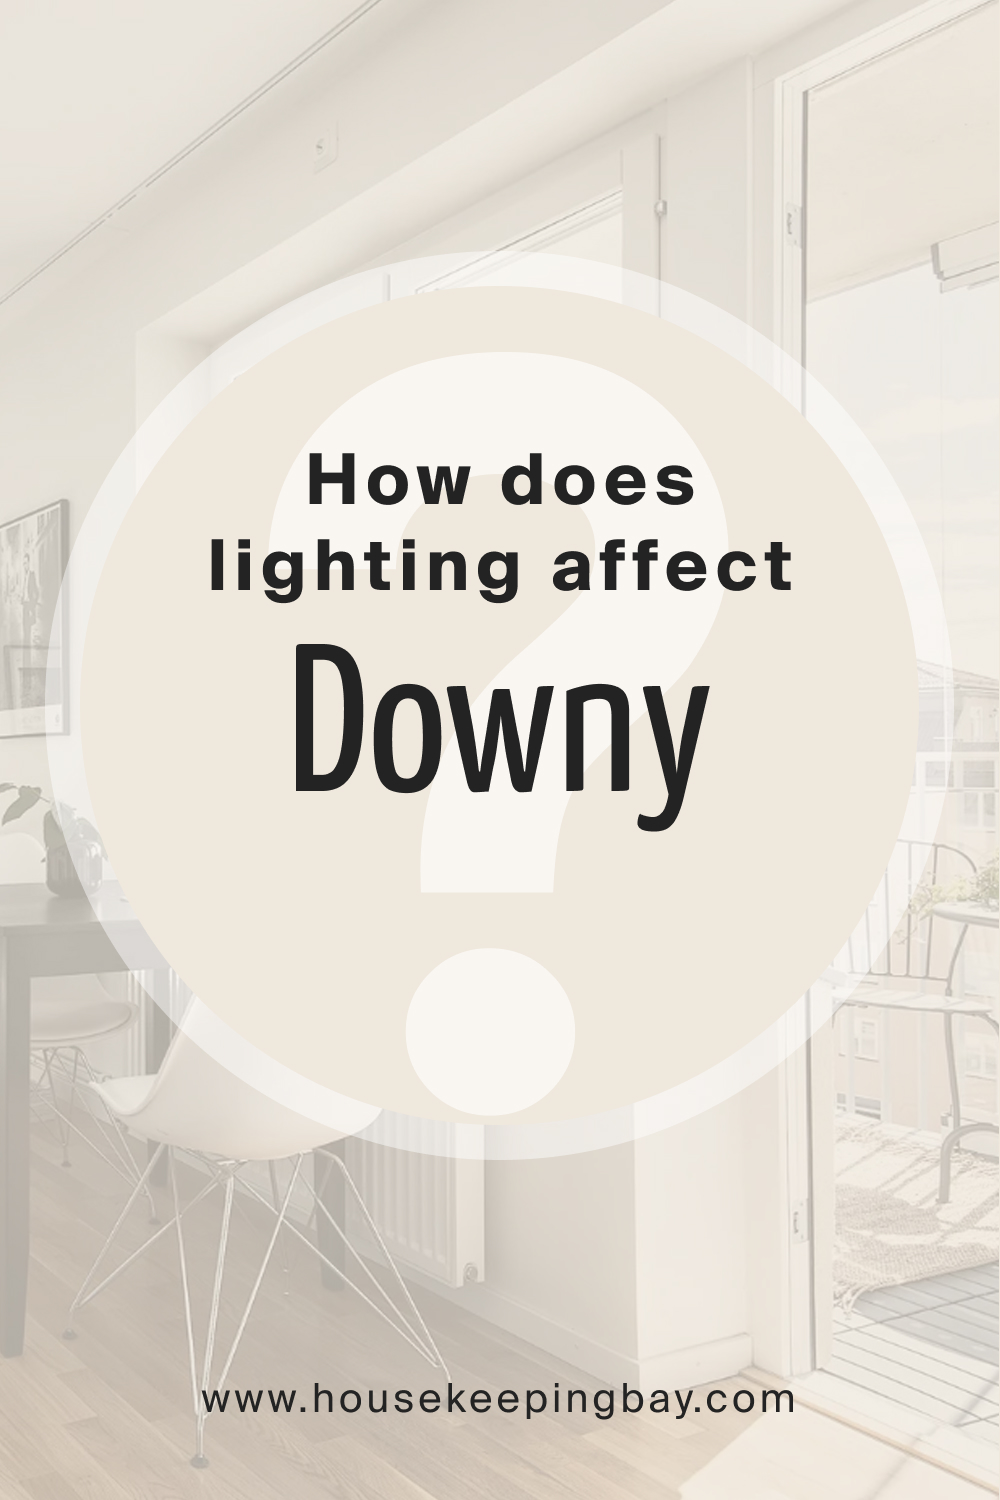 How does lighting affect SW Downy